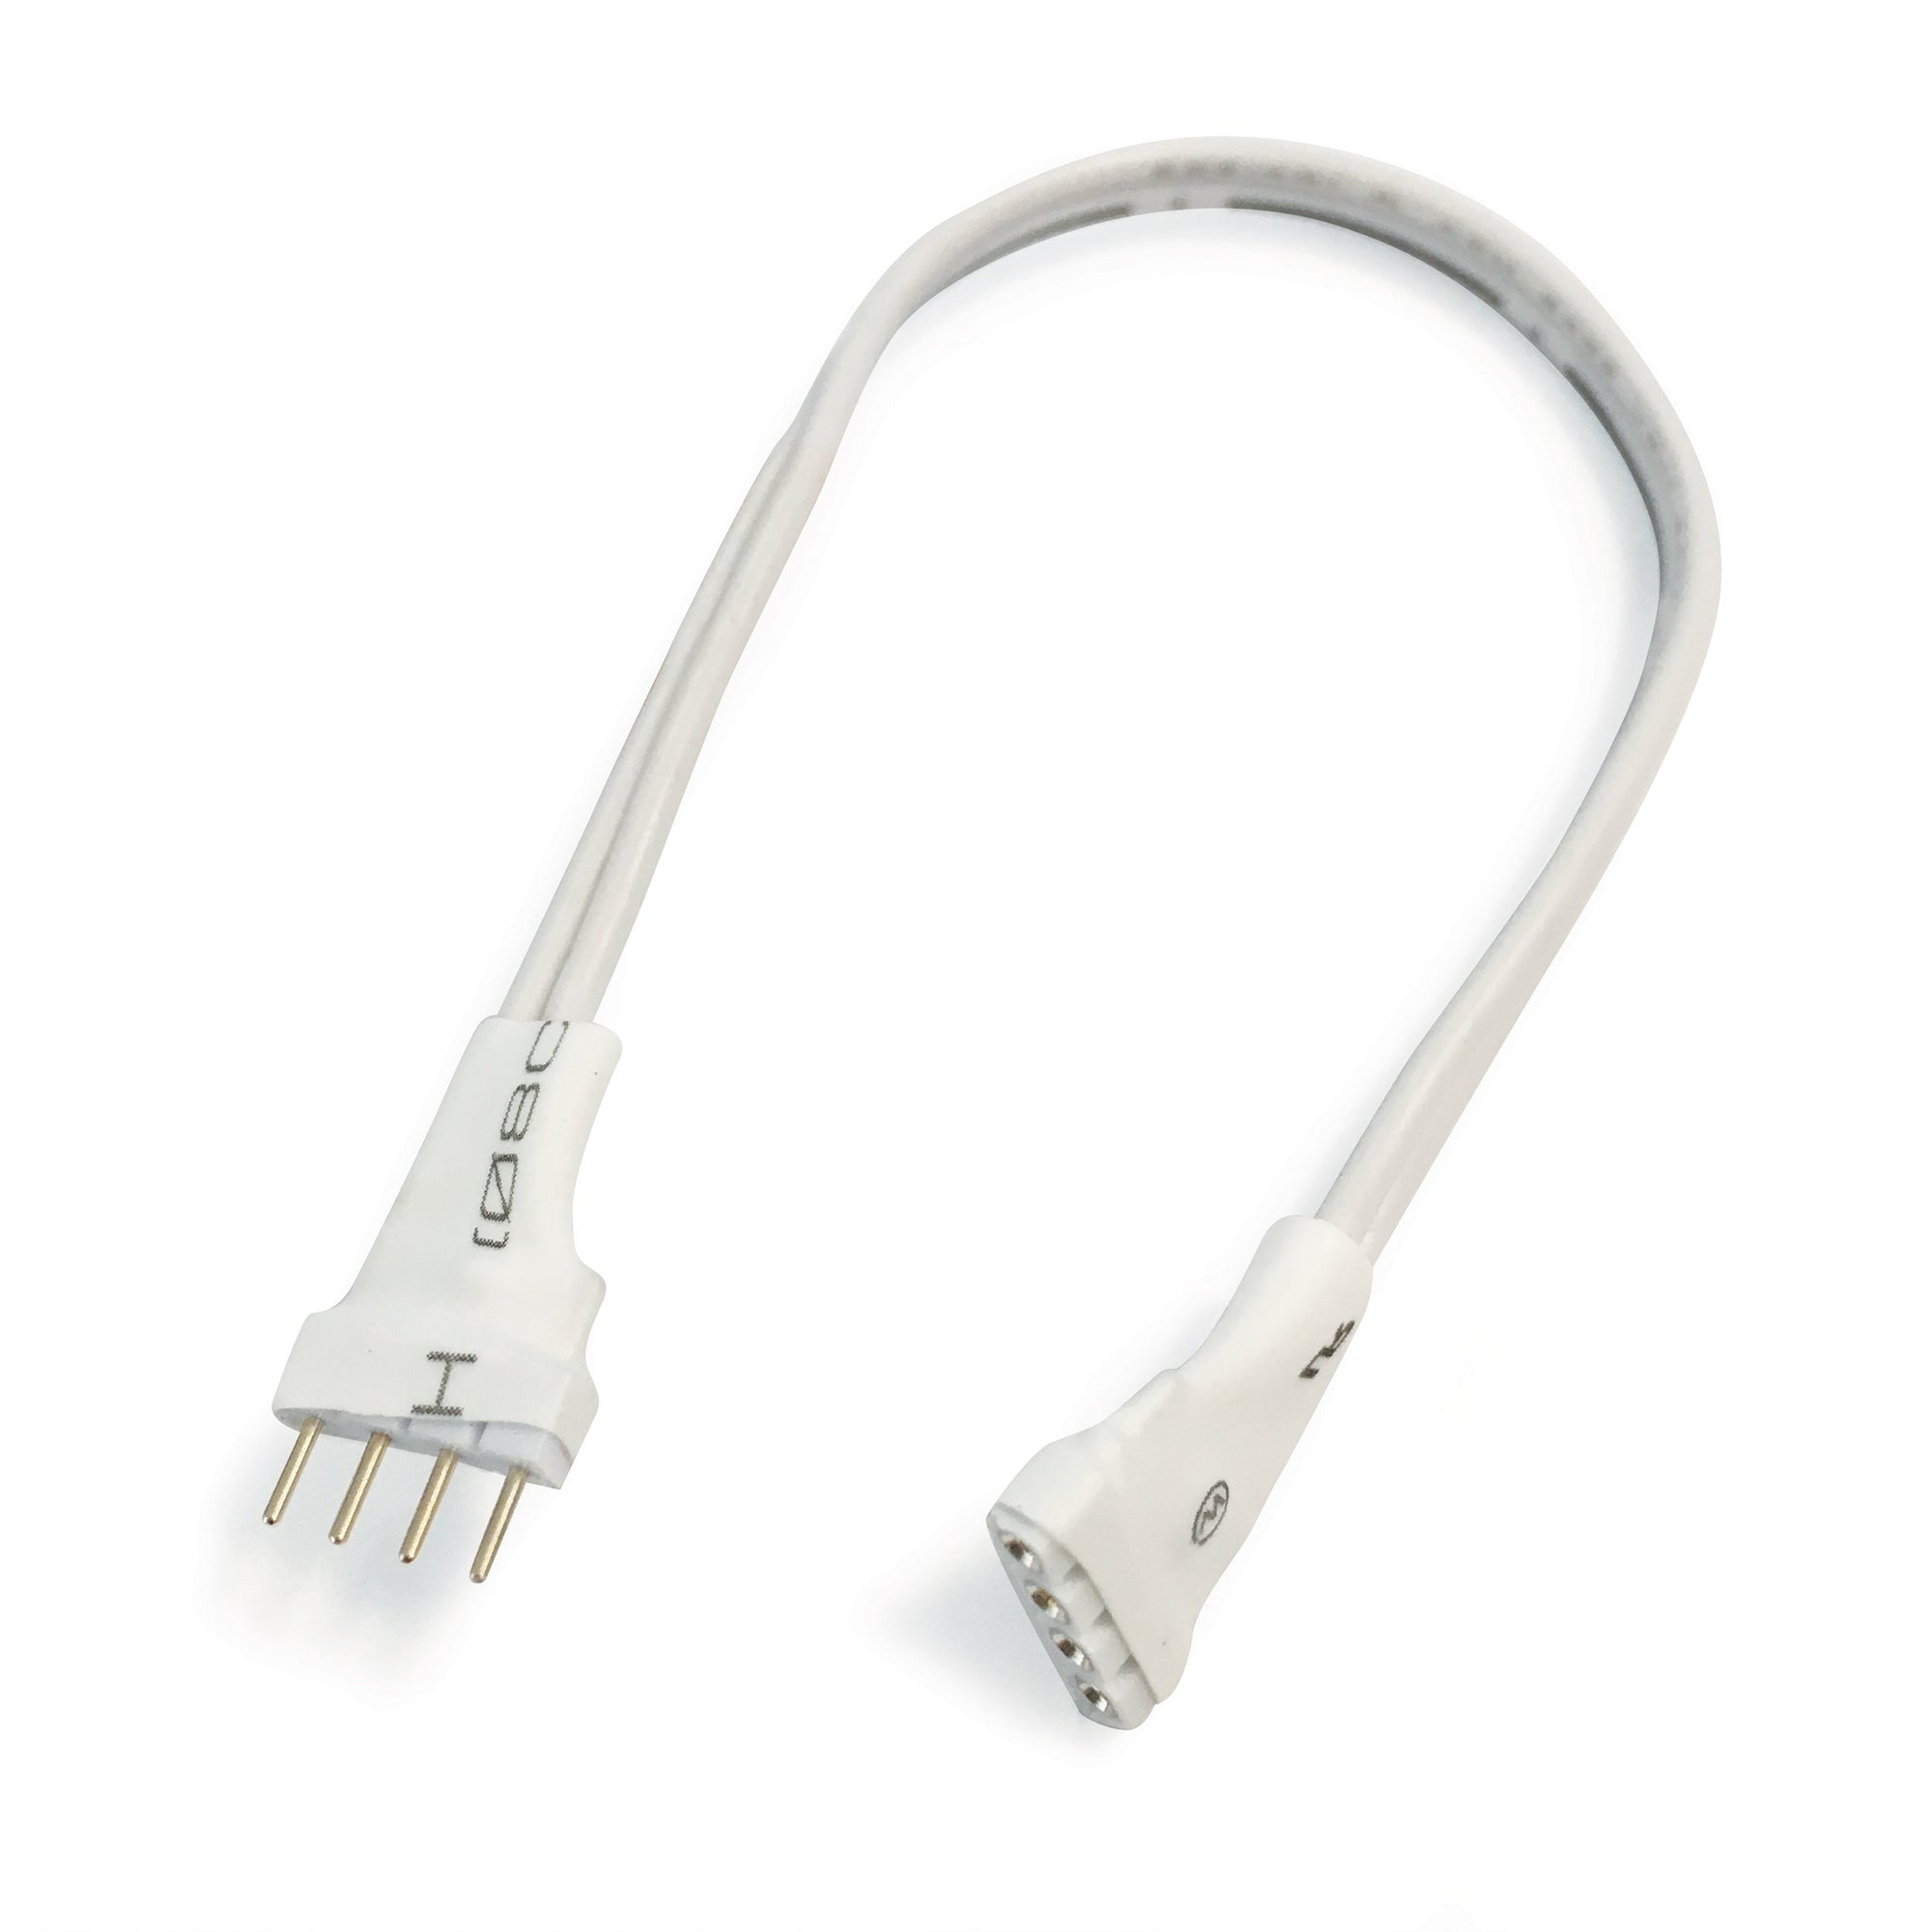 Nora Lighting NARGBW-906W - Accent / Undercabinet - 6 Inch Interconnection Cable for RGBW Tape Light